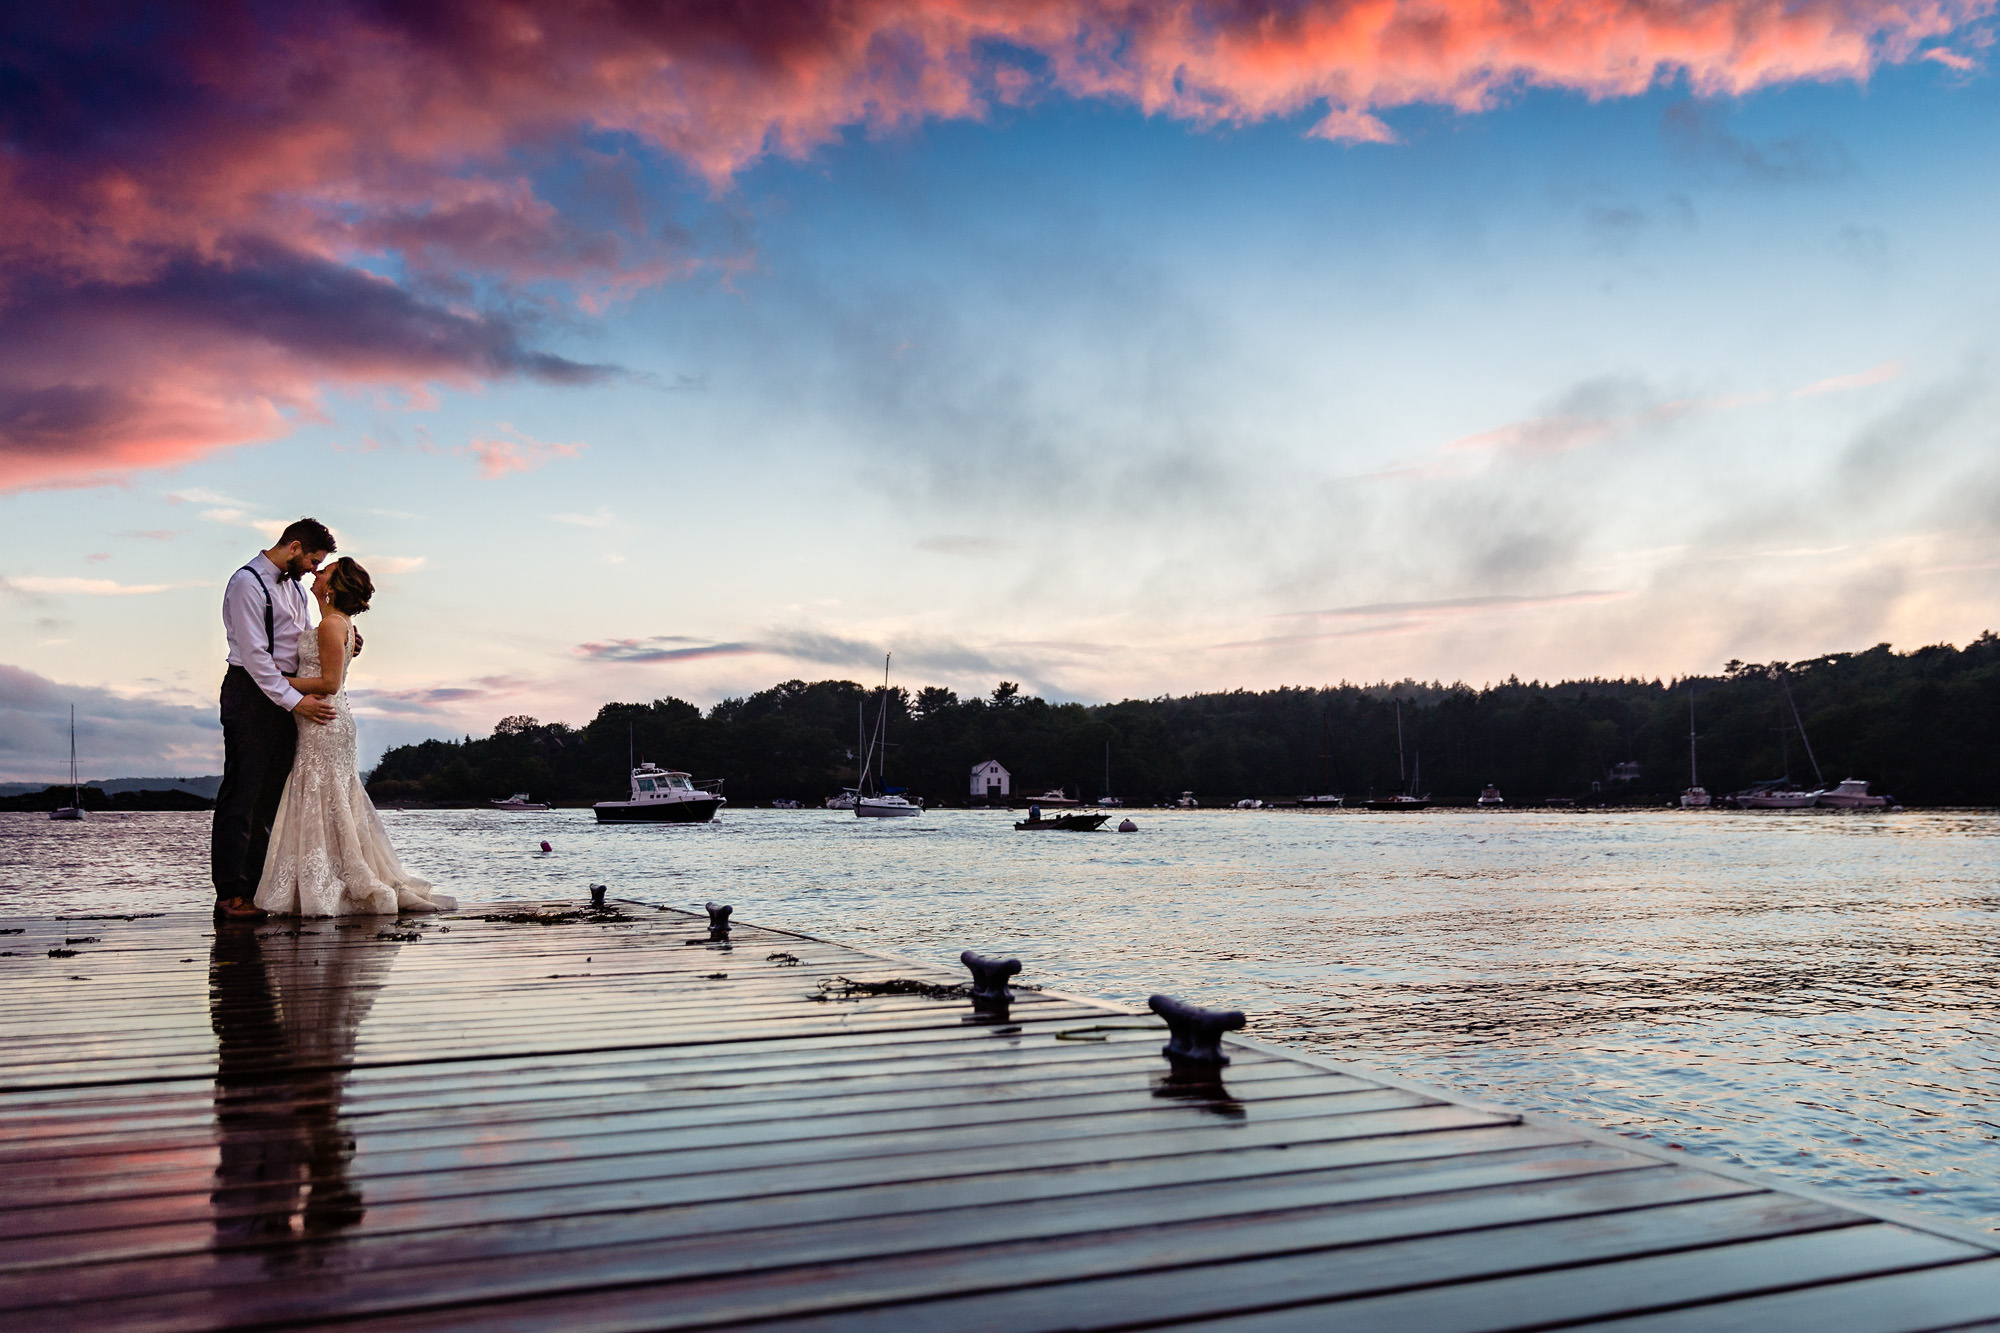 A The Contented Soul wedding in New Harbor, Maine